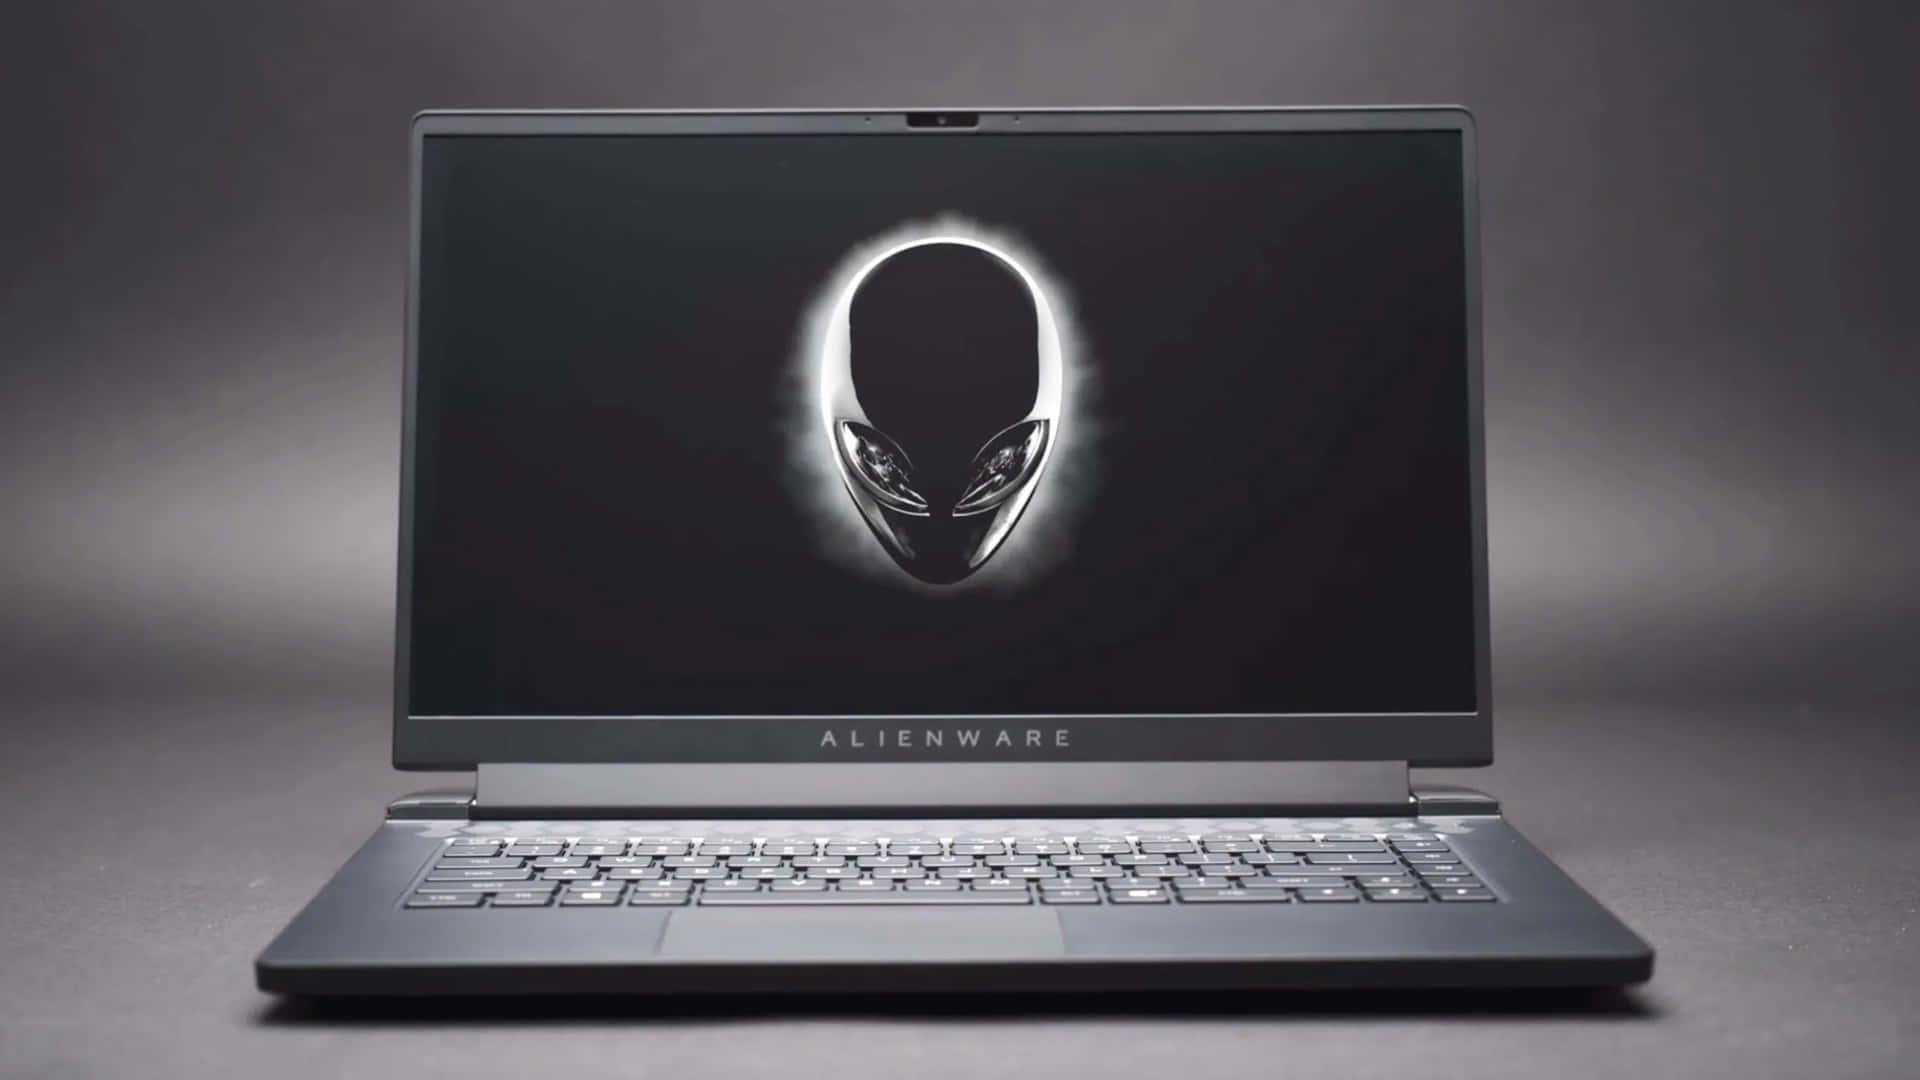 "Harness the power within in your gaming endeavors with Alienware"